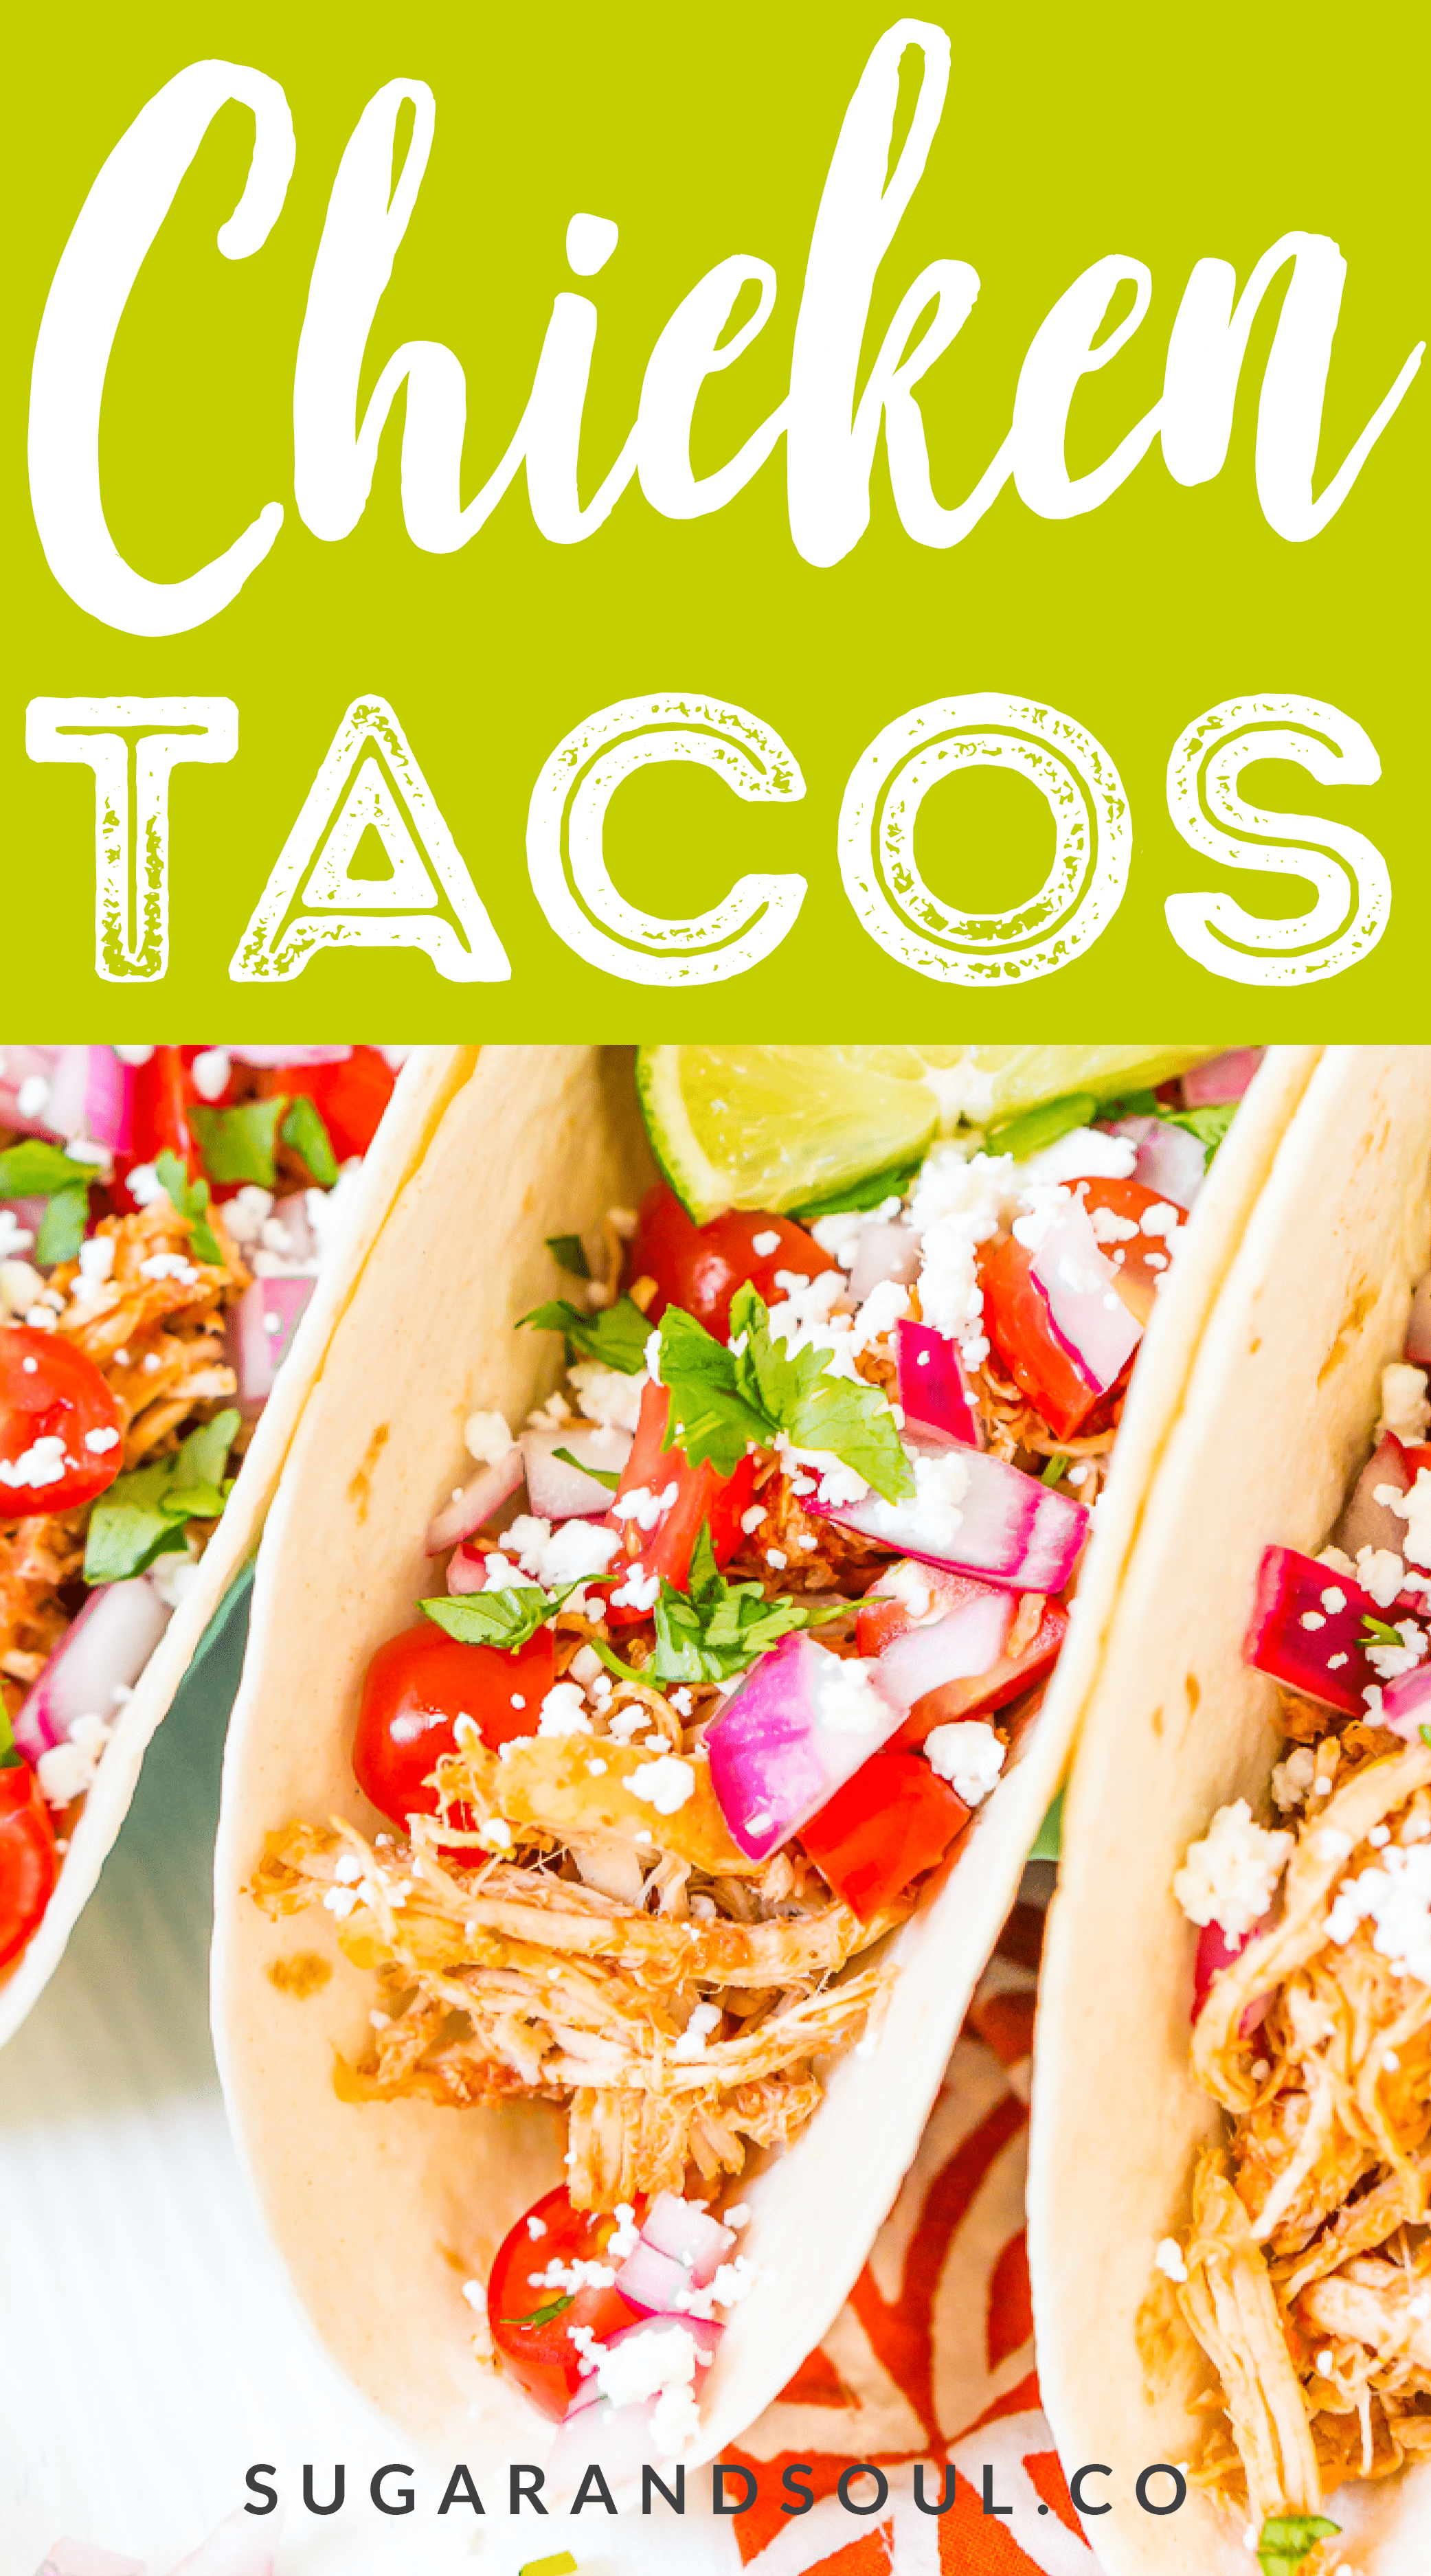 These Shredded Chicken Tacos are an easy and flavorful dinner to enjoy with friends and family. The chicken is loaded with spices and topped with fresh veggies and cheese all wrapped in a soft flour tortilla. via @sugarandsoulco